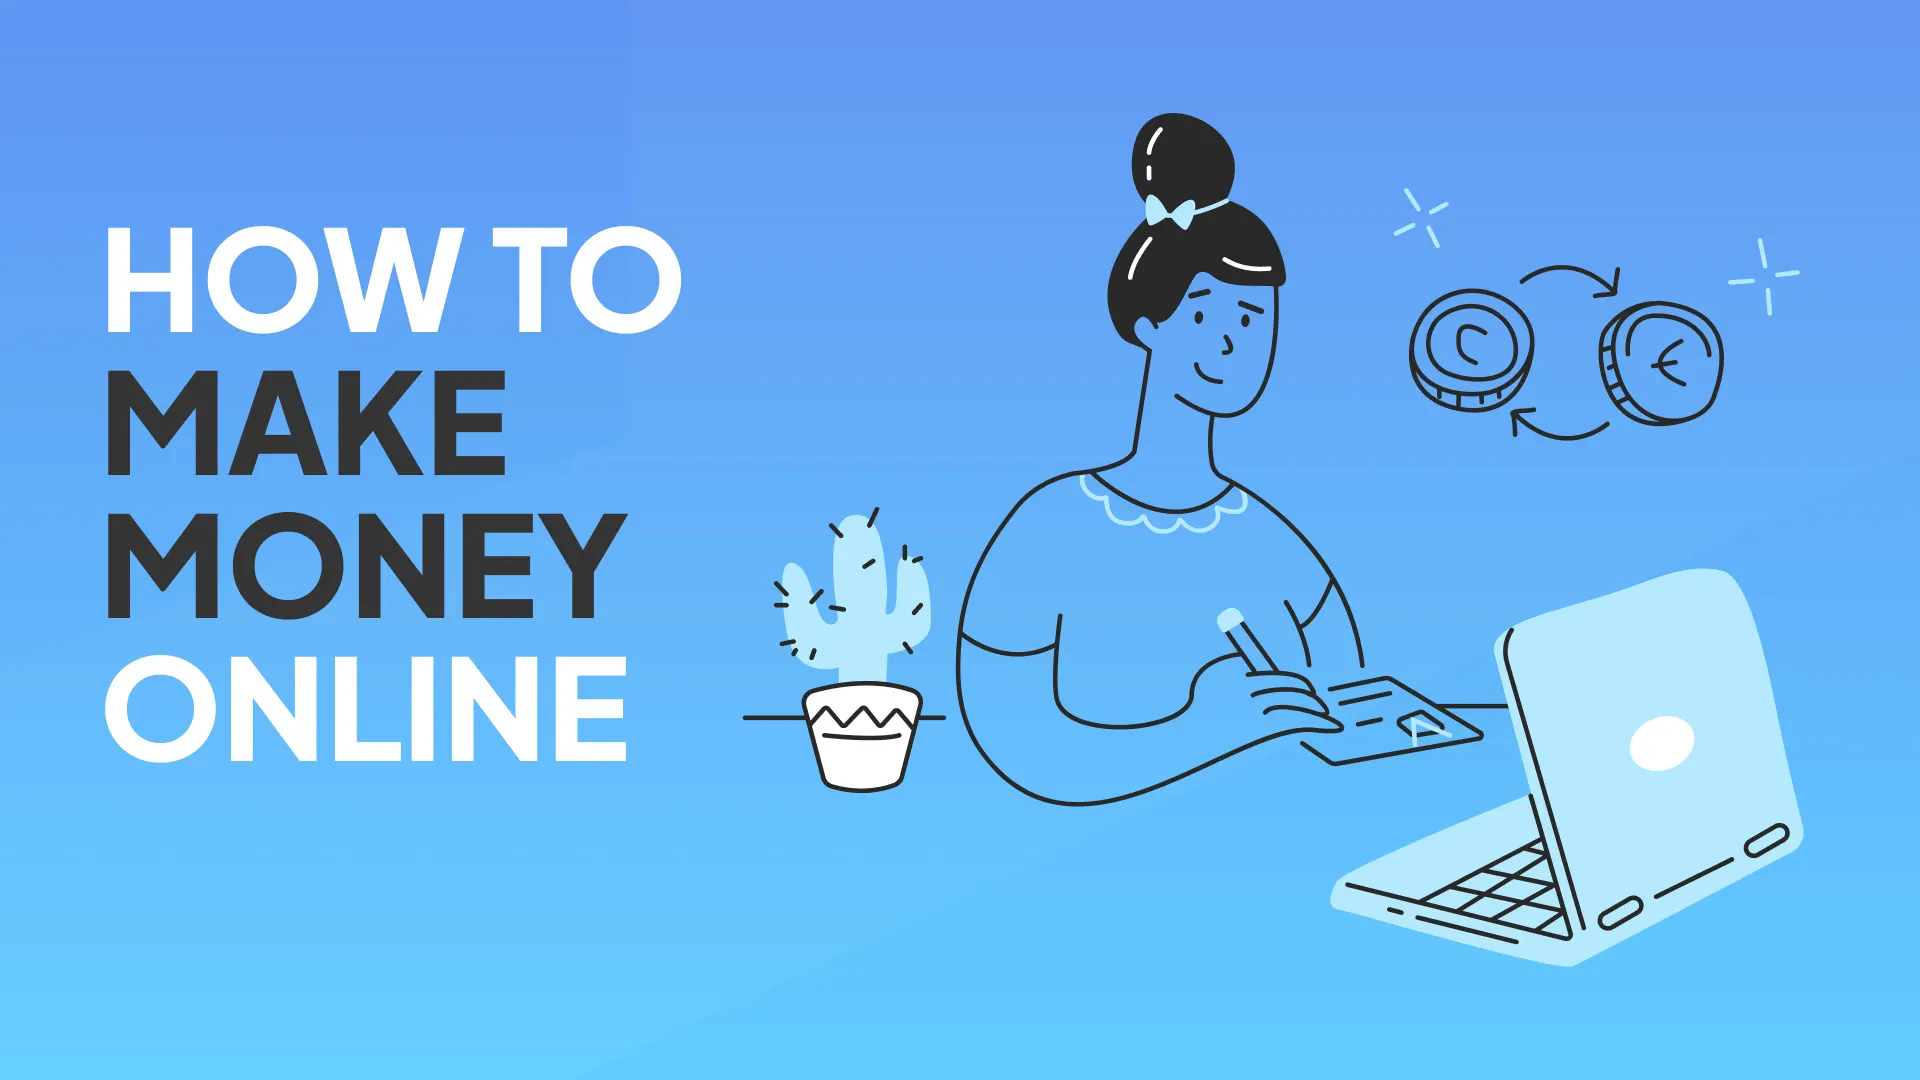 How To Make Money Online: 73 Ways + Real Examples ... for Dummies